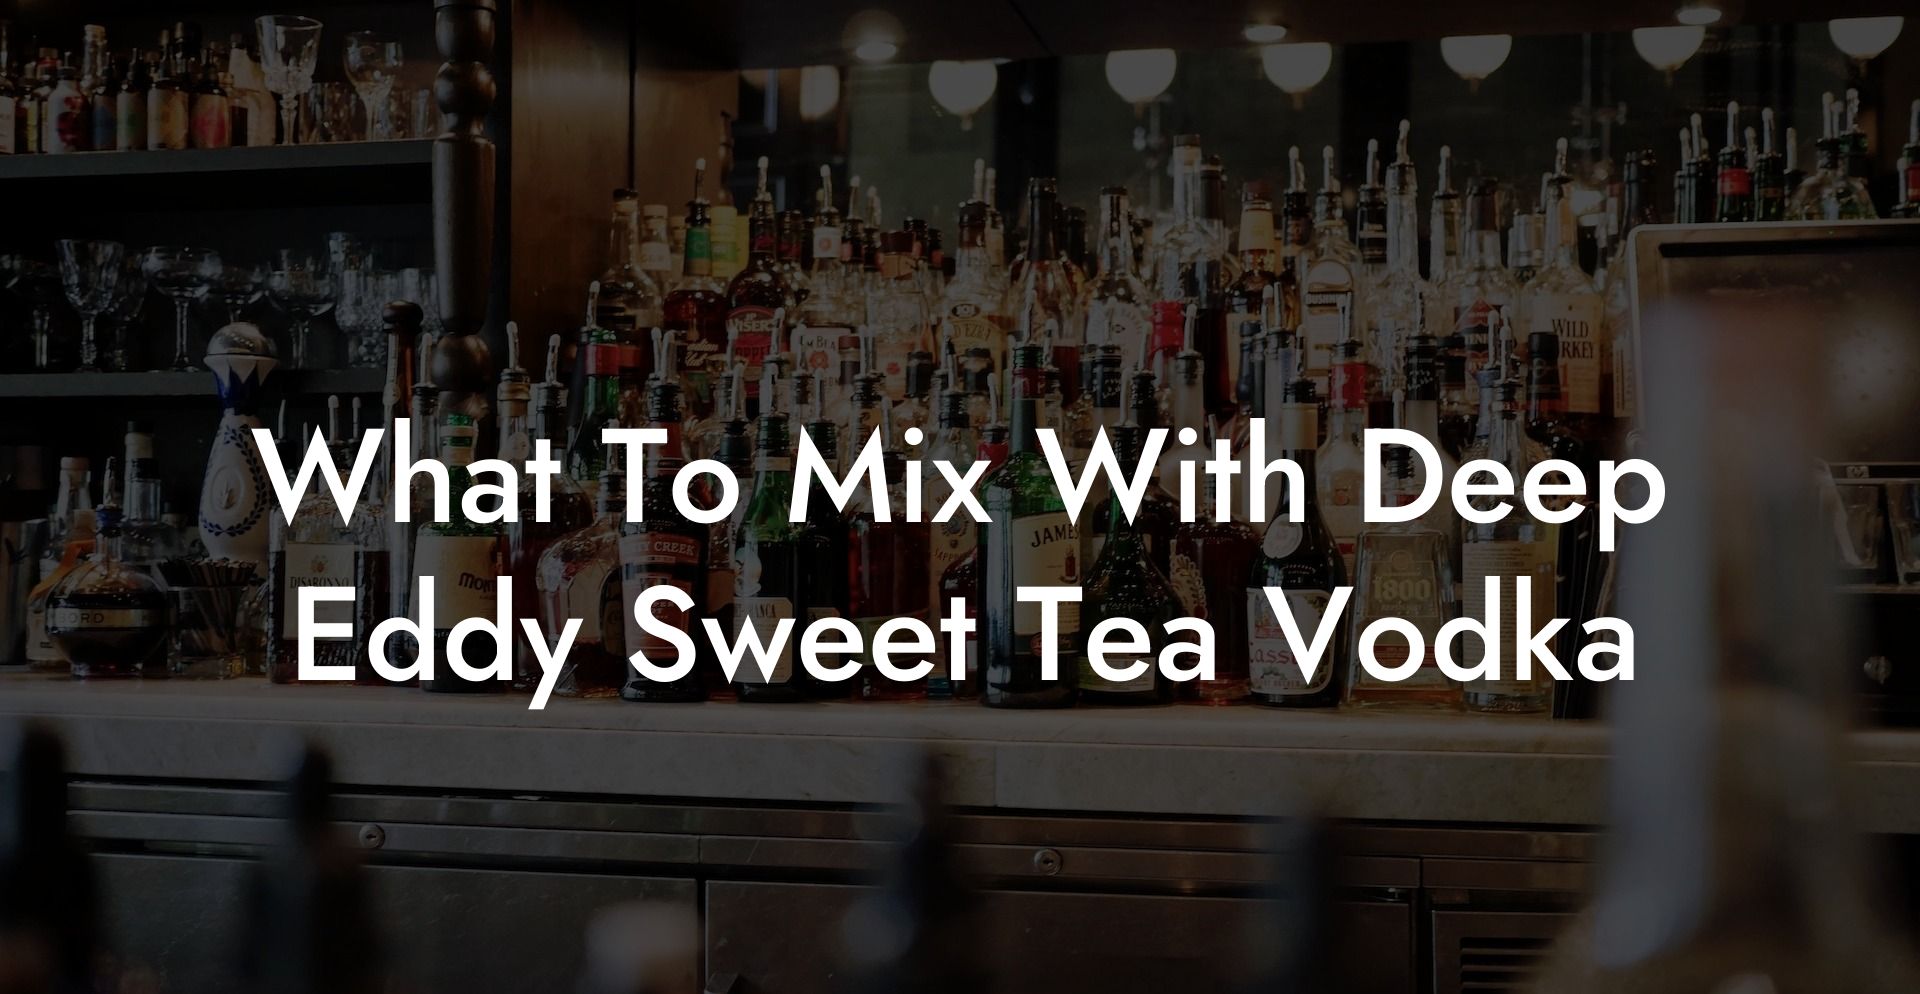 What To Mix With Deep Eddy Sweet Tea Vodka